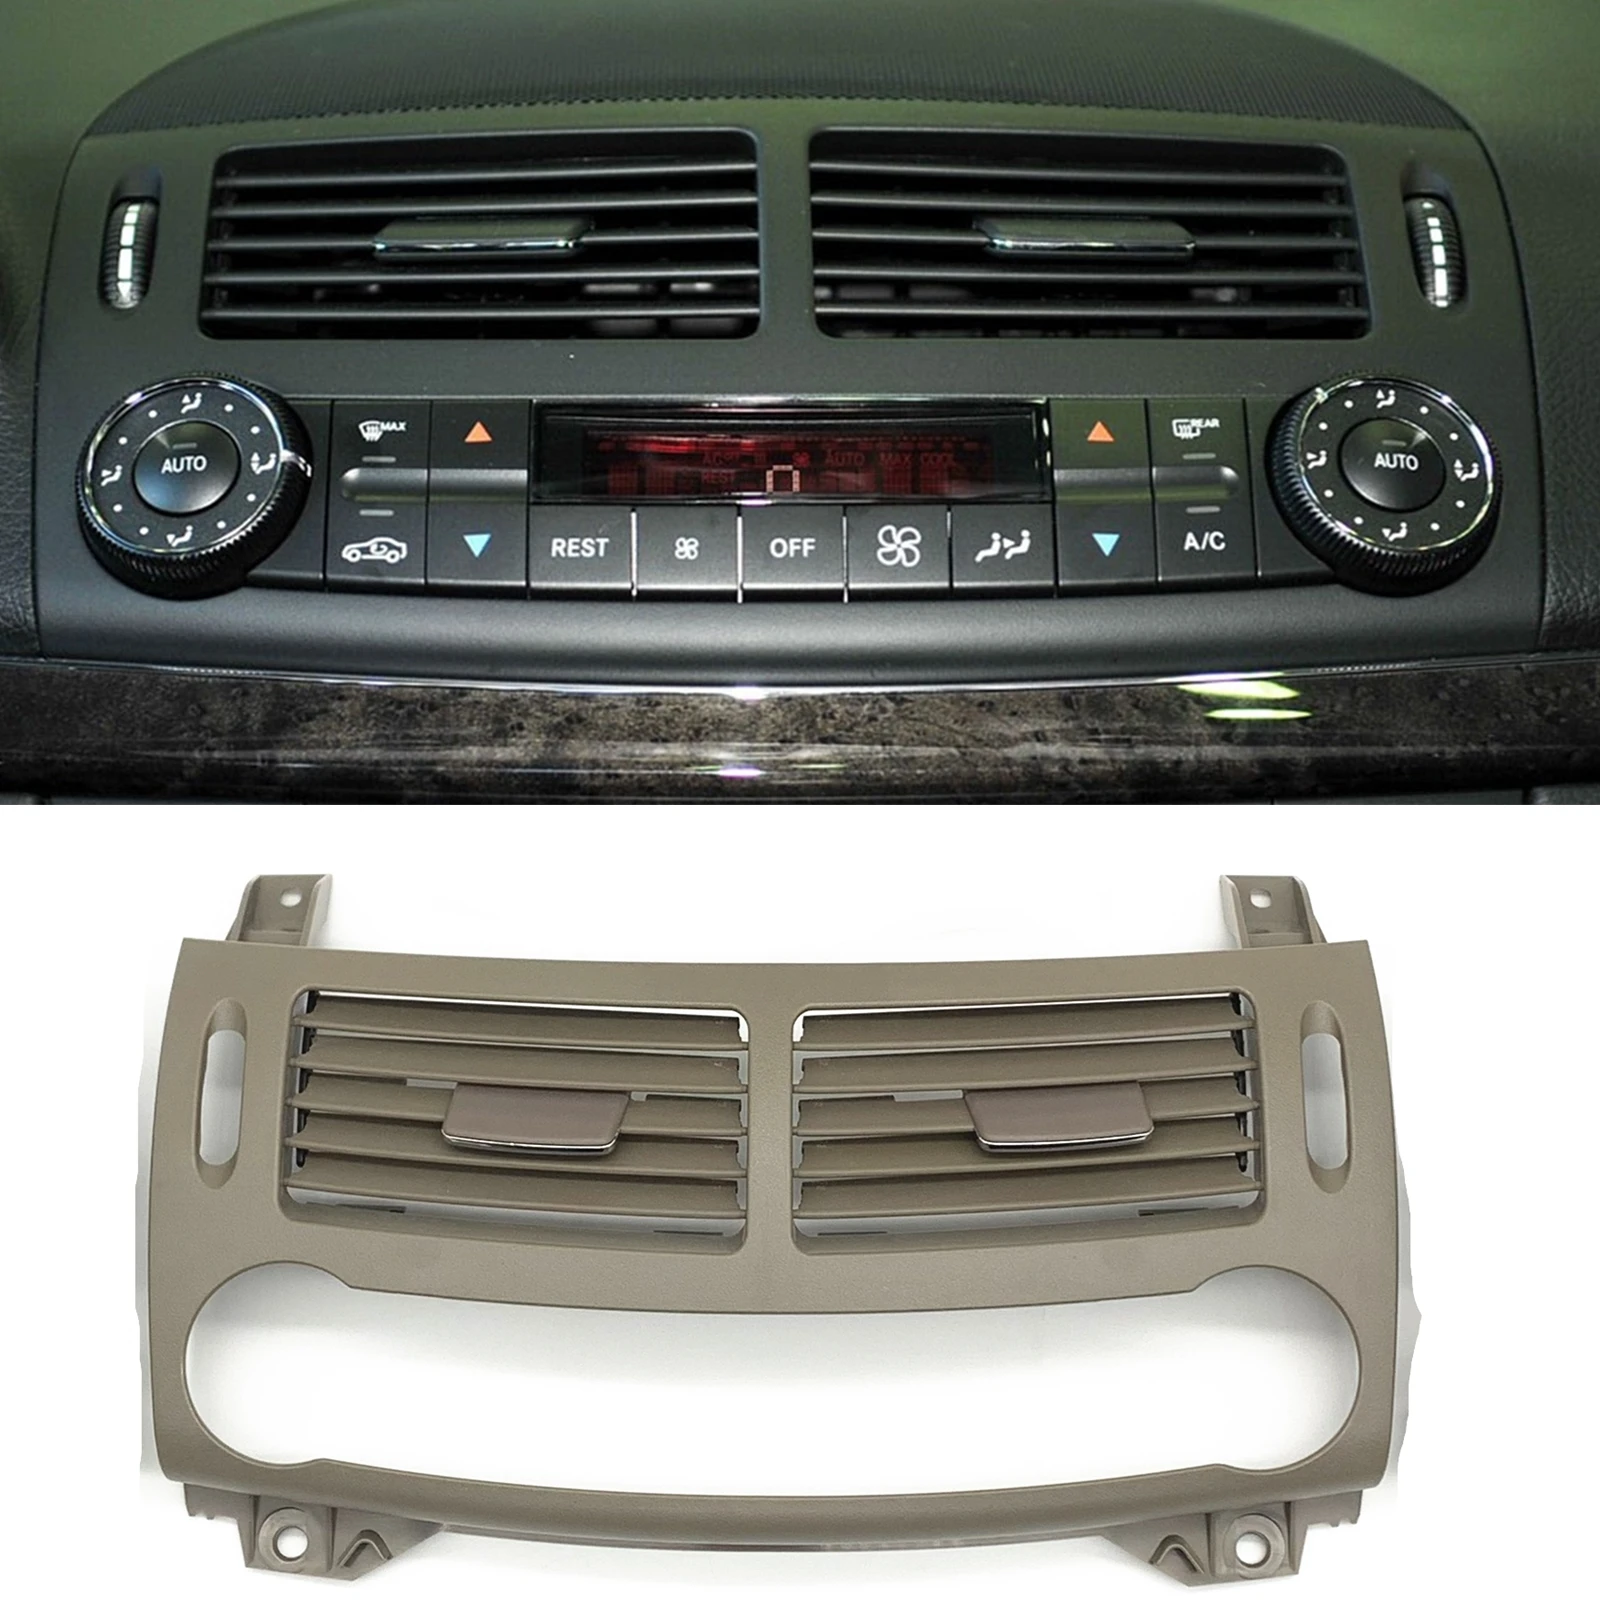 

For Mercedes-Benz E Class W211 2003-2008 CLS Class W219 2007-2009 Front Center A/C Air Vent Outlet Grill Cover Trim